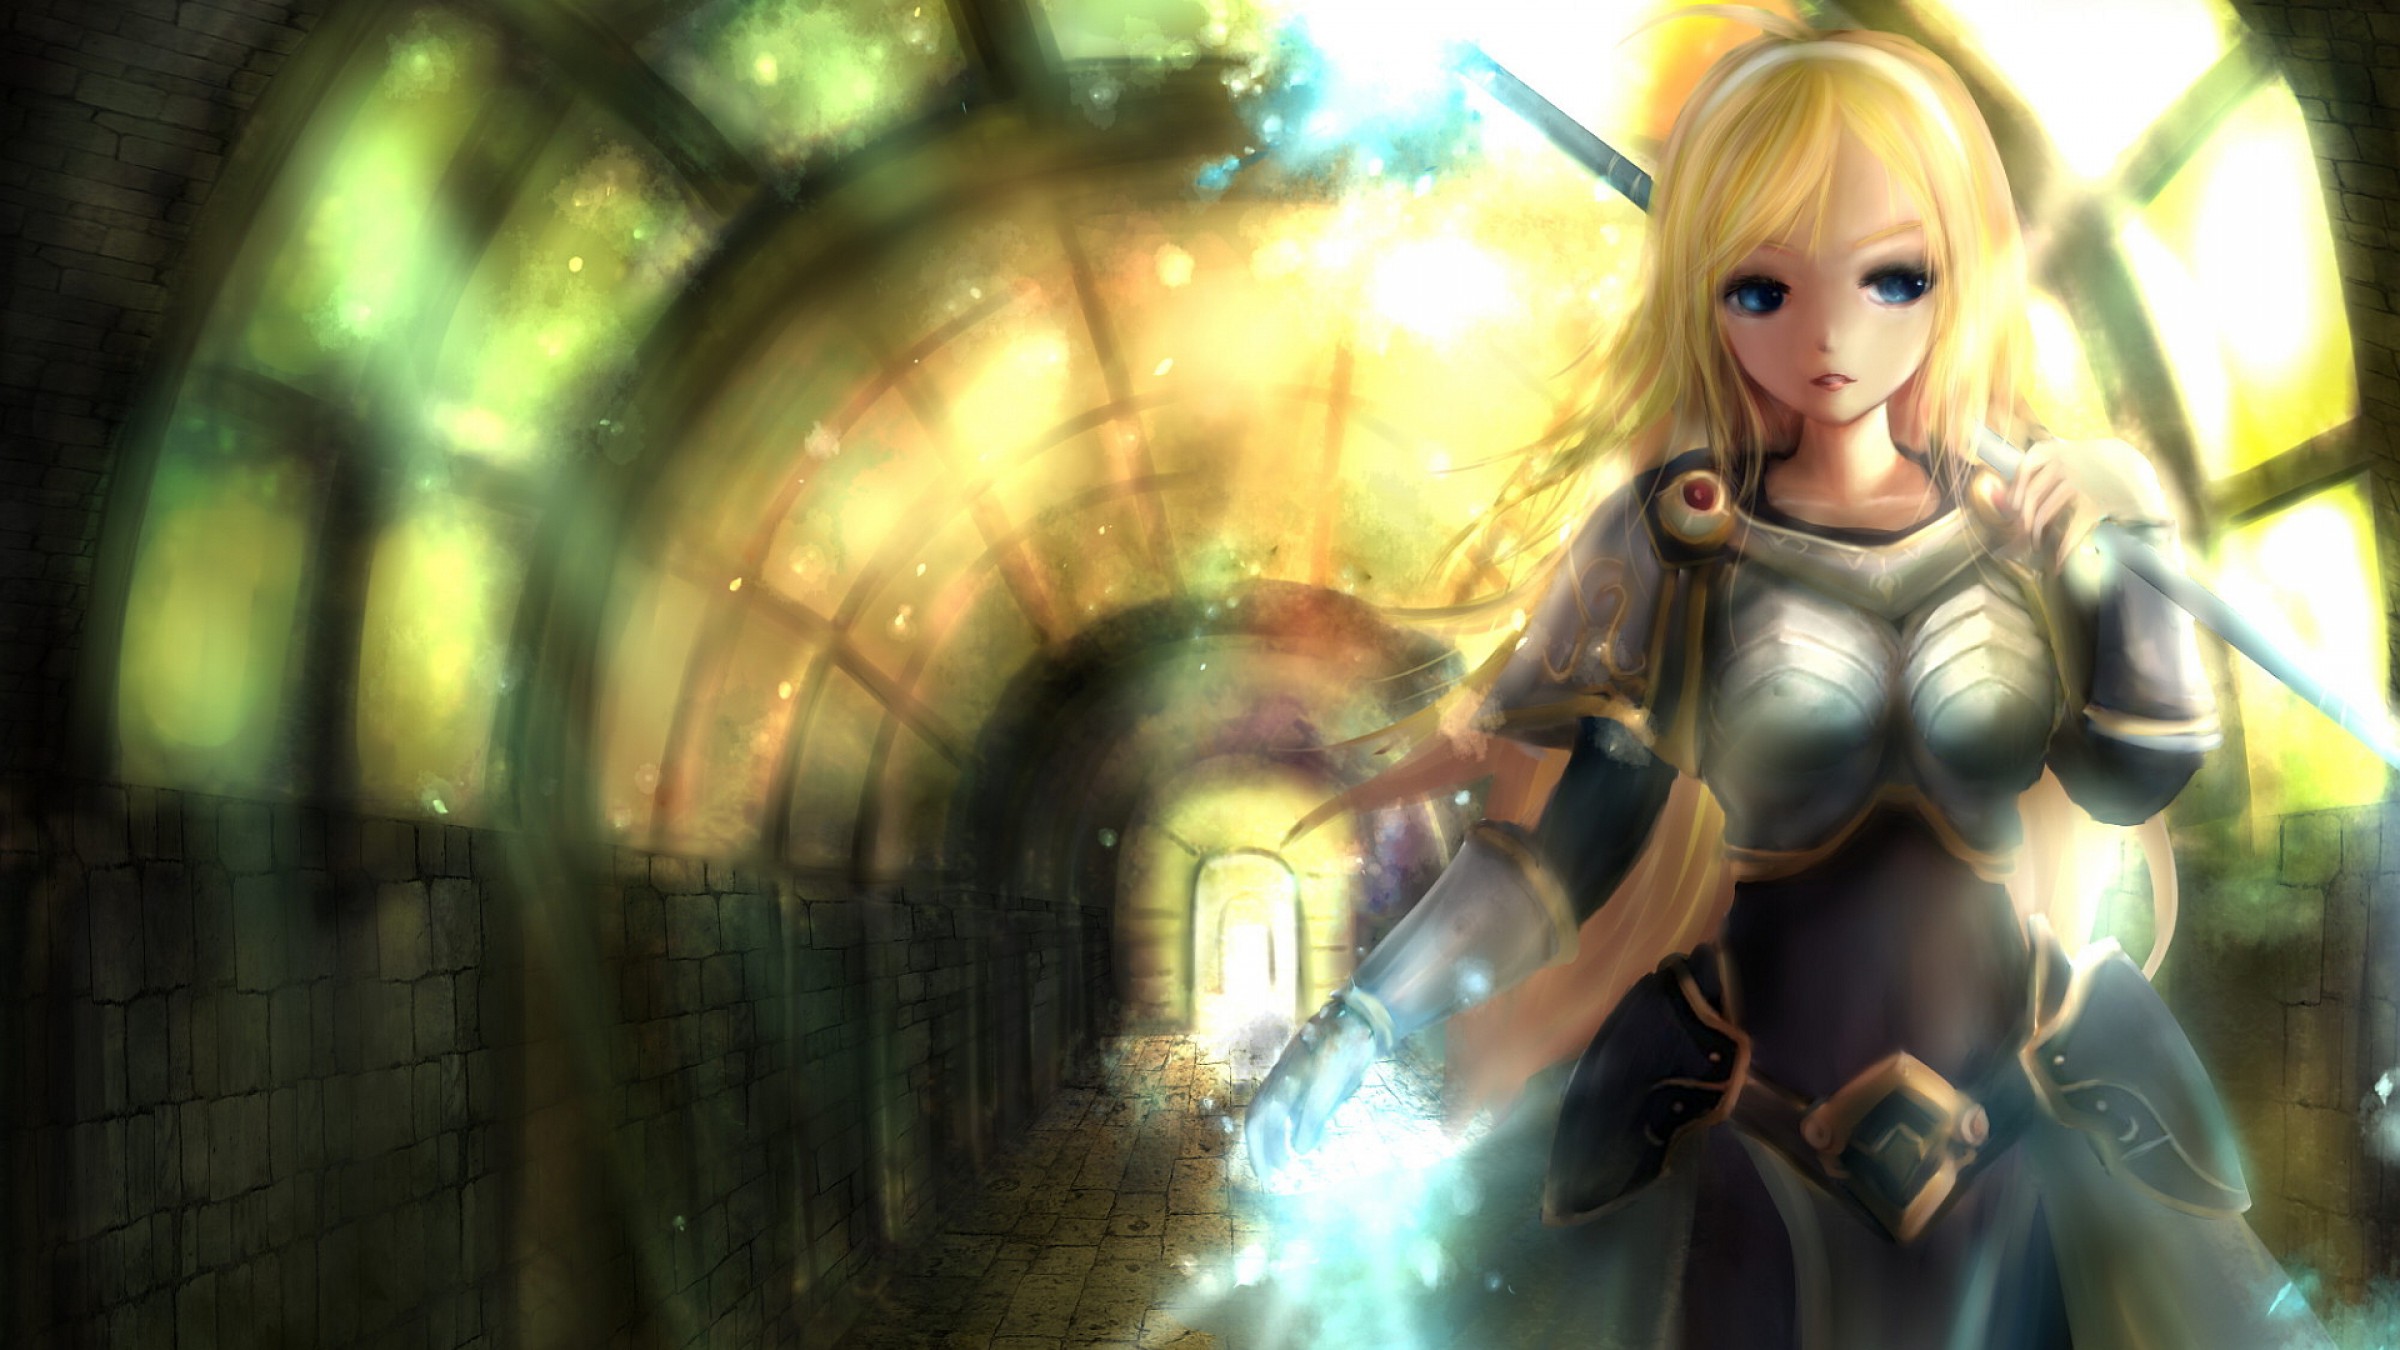 lux wallpaper,action adventure game,cg artwork,adventure game,fictional character,digital compositing